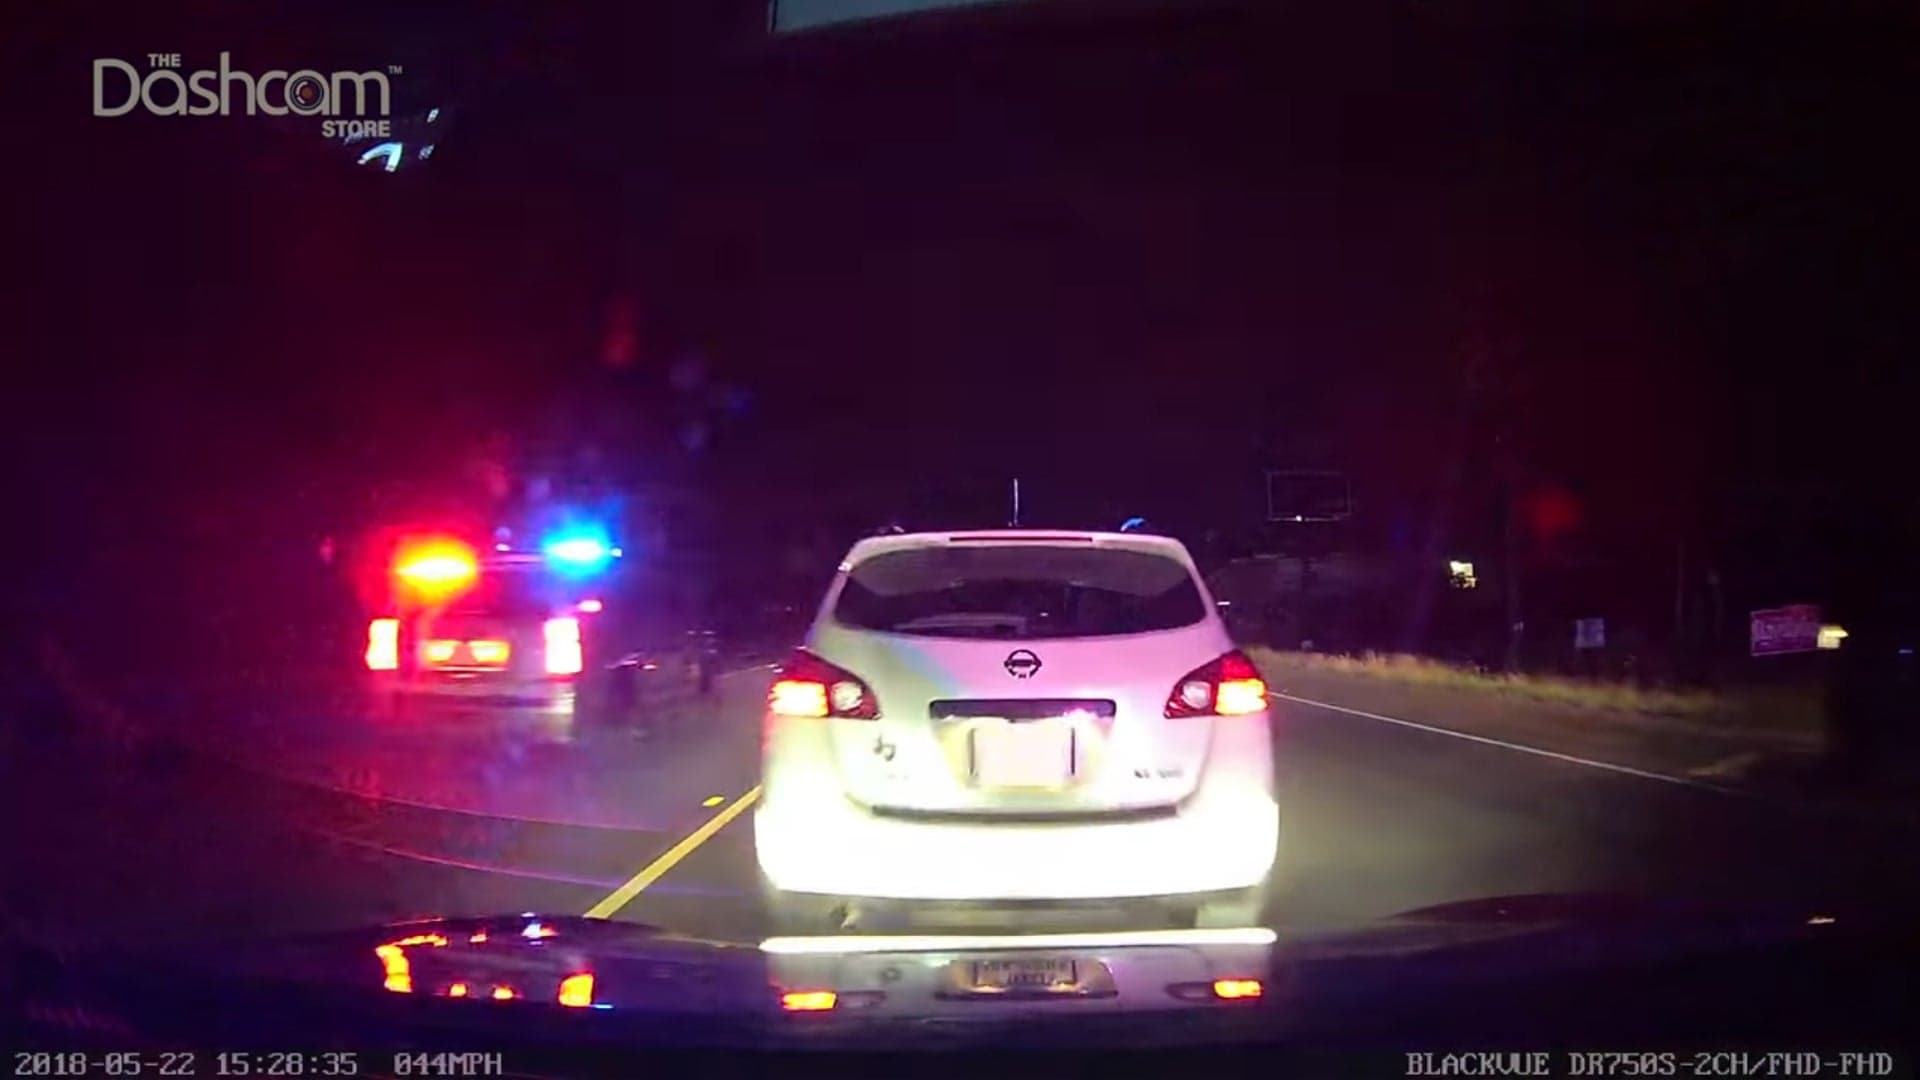 Watch This Tesla Model S Rear-End a Nissan Rogue Right in Front of Police